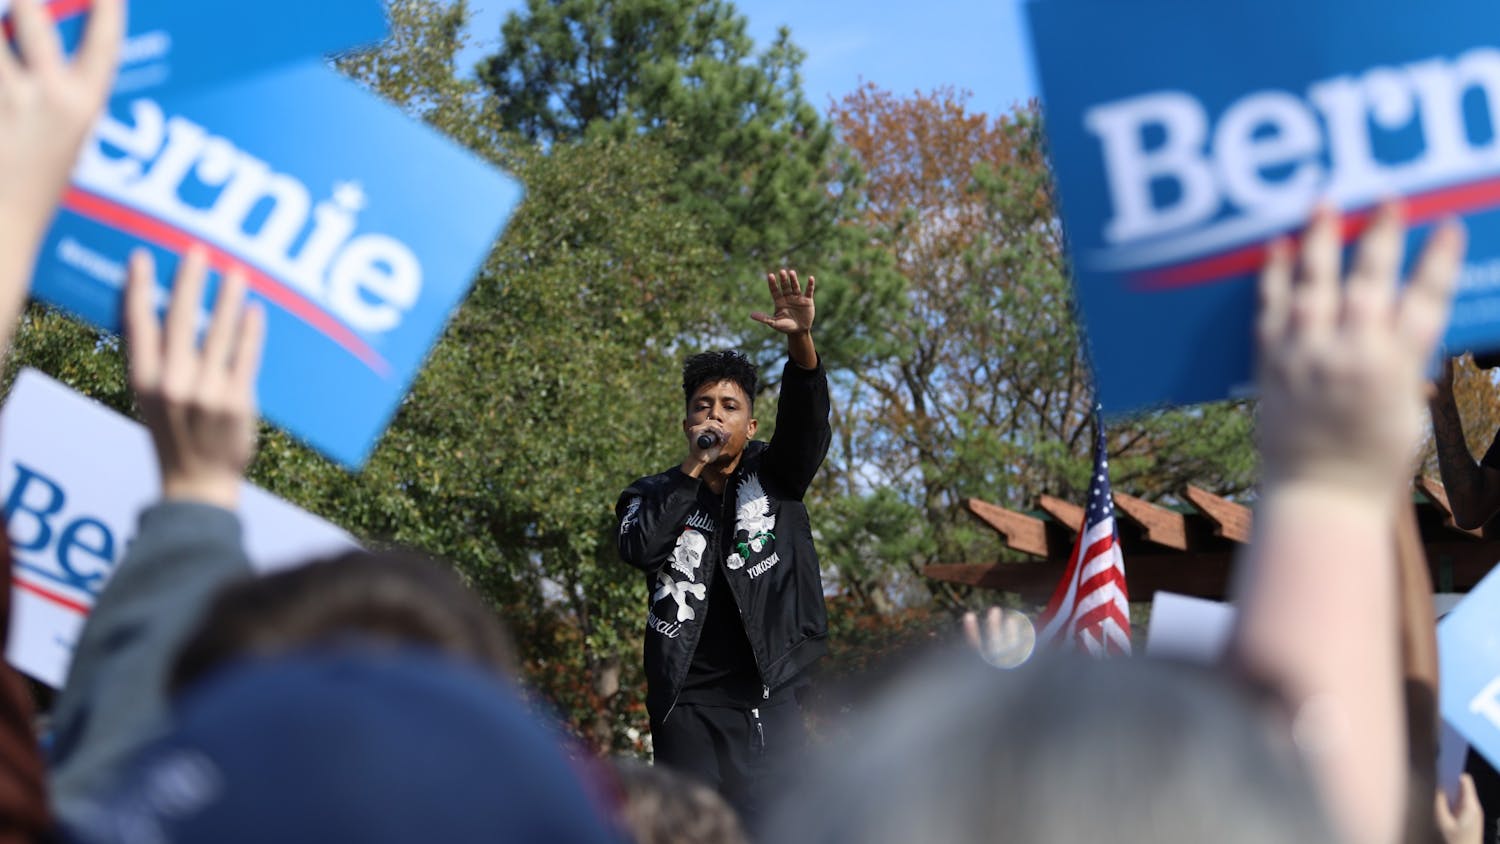 Southern hip-hop duo Blackillac, compromised of Emcees Zeale and Phranchyze, sings at a Bernie Sanders rally Feb. 28, 2020, at Finlay Park in Columbia.